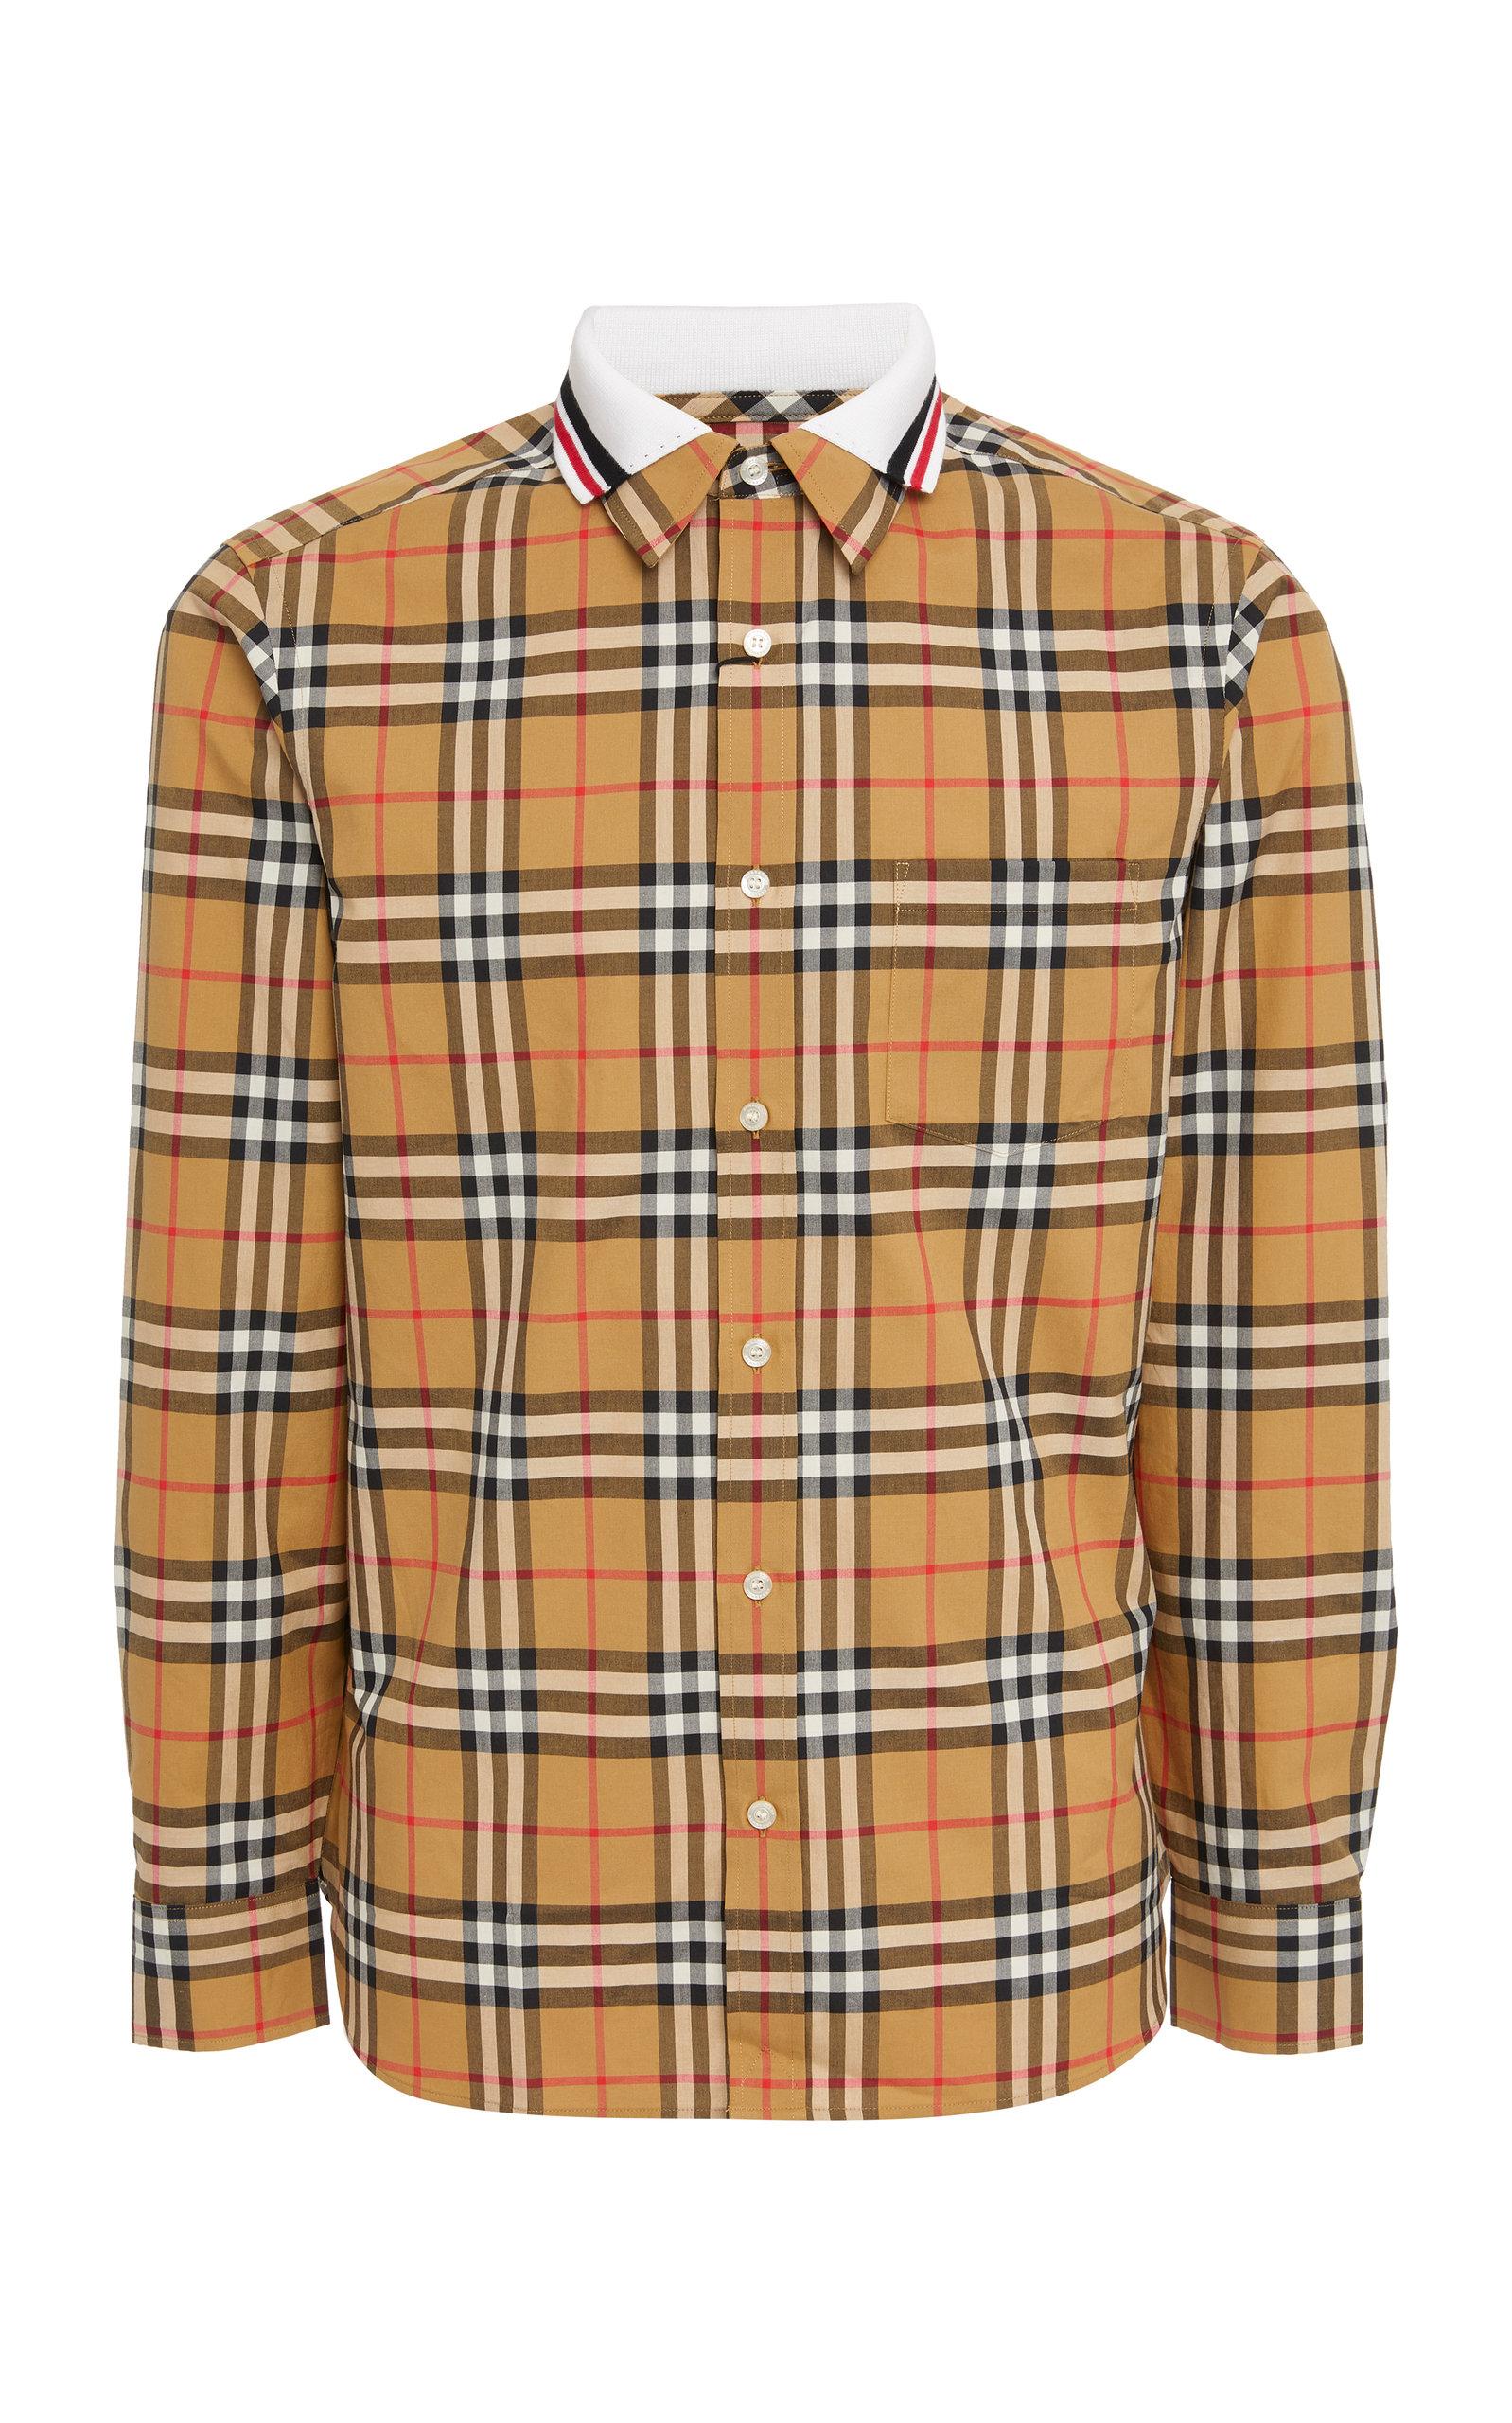 Burberry Edward Checked Cotton-pique Button-up Shirt for Men - Lyst